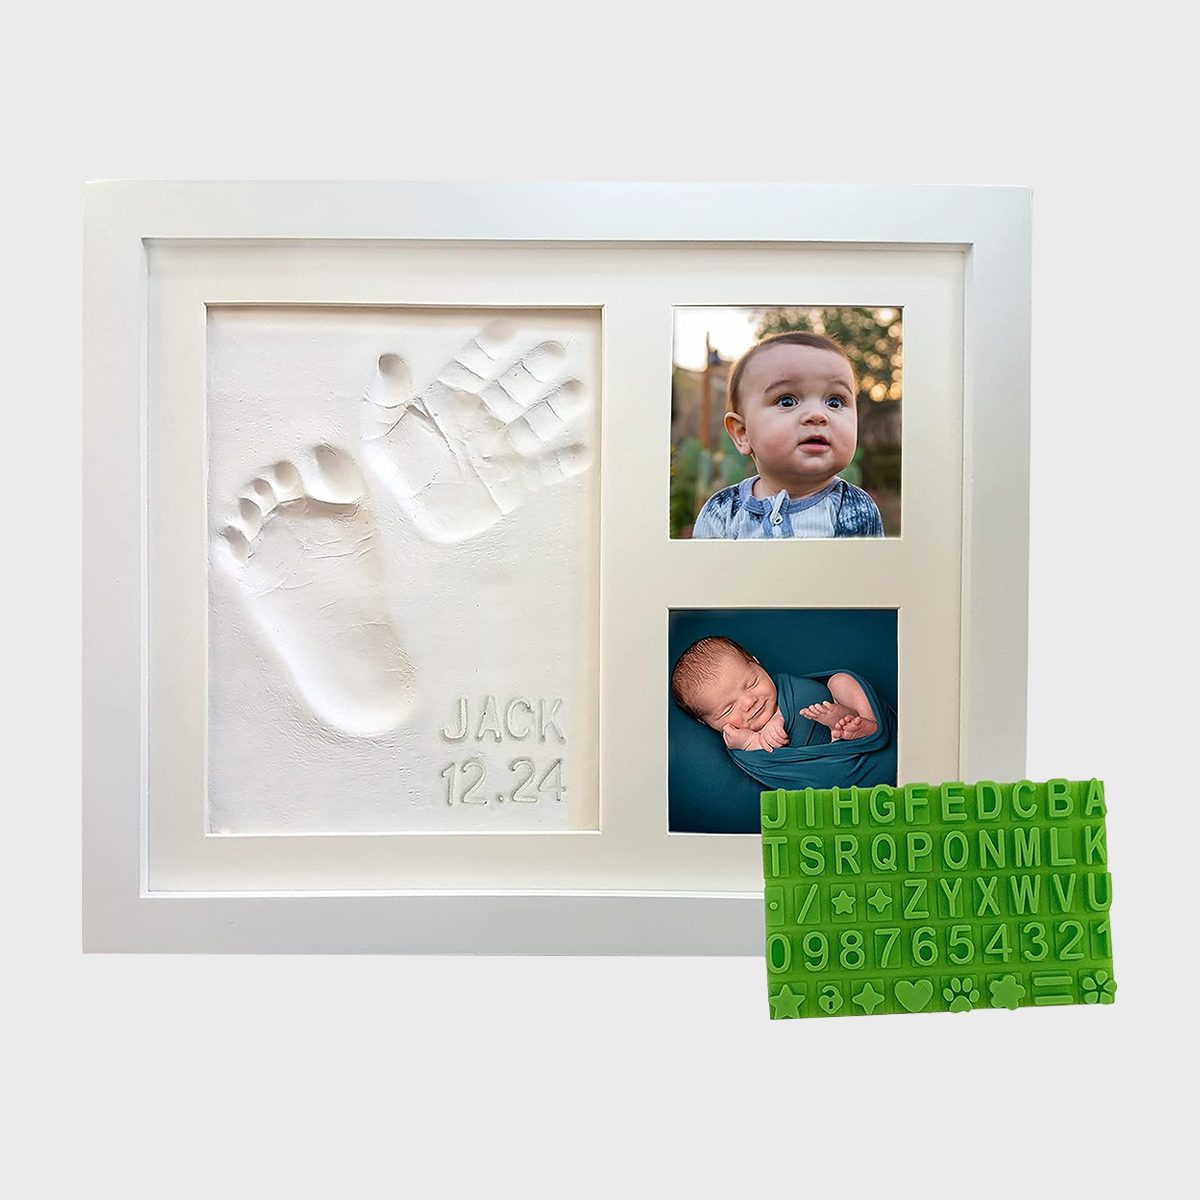 <p>Choosing baby gifts that require some work isn't always a bad thing. Let them capture the early days of parenting with this swoon-worthy <a href="https://www.amazon.com/dp/B071LML552/" rel="nofollow noopener noreferrer">hand and footprint keepsake</a> frame that boasts an extra two spots for the baby's first photos. And don't worry—it won't make a mess. The kit includes clay, a roller, double-sided tape, a stencil kit and more to make it a simple project for excited new parents.</p> <p class="listicle-page__cta-button-shop"><a class="shop-btn" href="https://www.amazon.com/dp/B071LML552/">Shop Now</a></p>  <h2>Creating your own baby registry</h2> <p>Are you the one who's expecting? Plenty of our curated baby gifts are also part of the <a href="https://www.amazon.com/baby-reg" rel="nofollow noopener noreferrer">Amazon Baby Registry</a>, which makes gift-giving and shipping a breeze. New parents love this registry's expansive selection of basics, bundles and design-forward products offered at every budget.</p> <p>Another huge perk? Even if an item you want isn't on Amazon, the company's universal registry allows you to add an item from any site to your Amazon registry. Group gifting, a 365-day return policy and a 10% completion discount (15% for Prime members) make Amazon's baby registry a smart option for parents to get just what they want.</p> <h2>How we chose the best baby gifts</h2> <p>From sweet matching outfits that make excellent <a href="https://www.rd.com/list/gifts-for-sister/" rel="noopener noreferrer">gifts for sisters</a> or sisters-in-law, to sentimental gifts for best friends getting ready to give birth, there is truly something for every type of new parent on our list. And it's all been vetted by parents, experts and thousands of five-star online reviewers.</p>